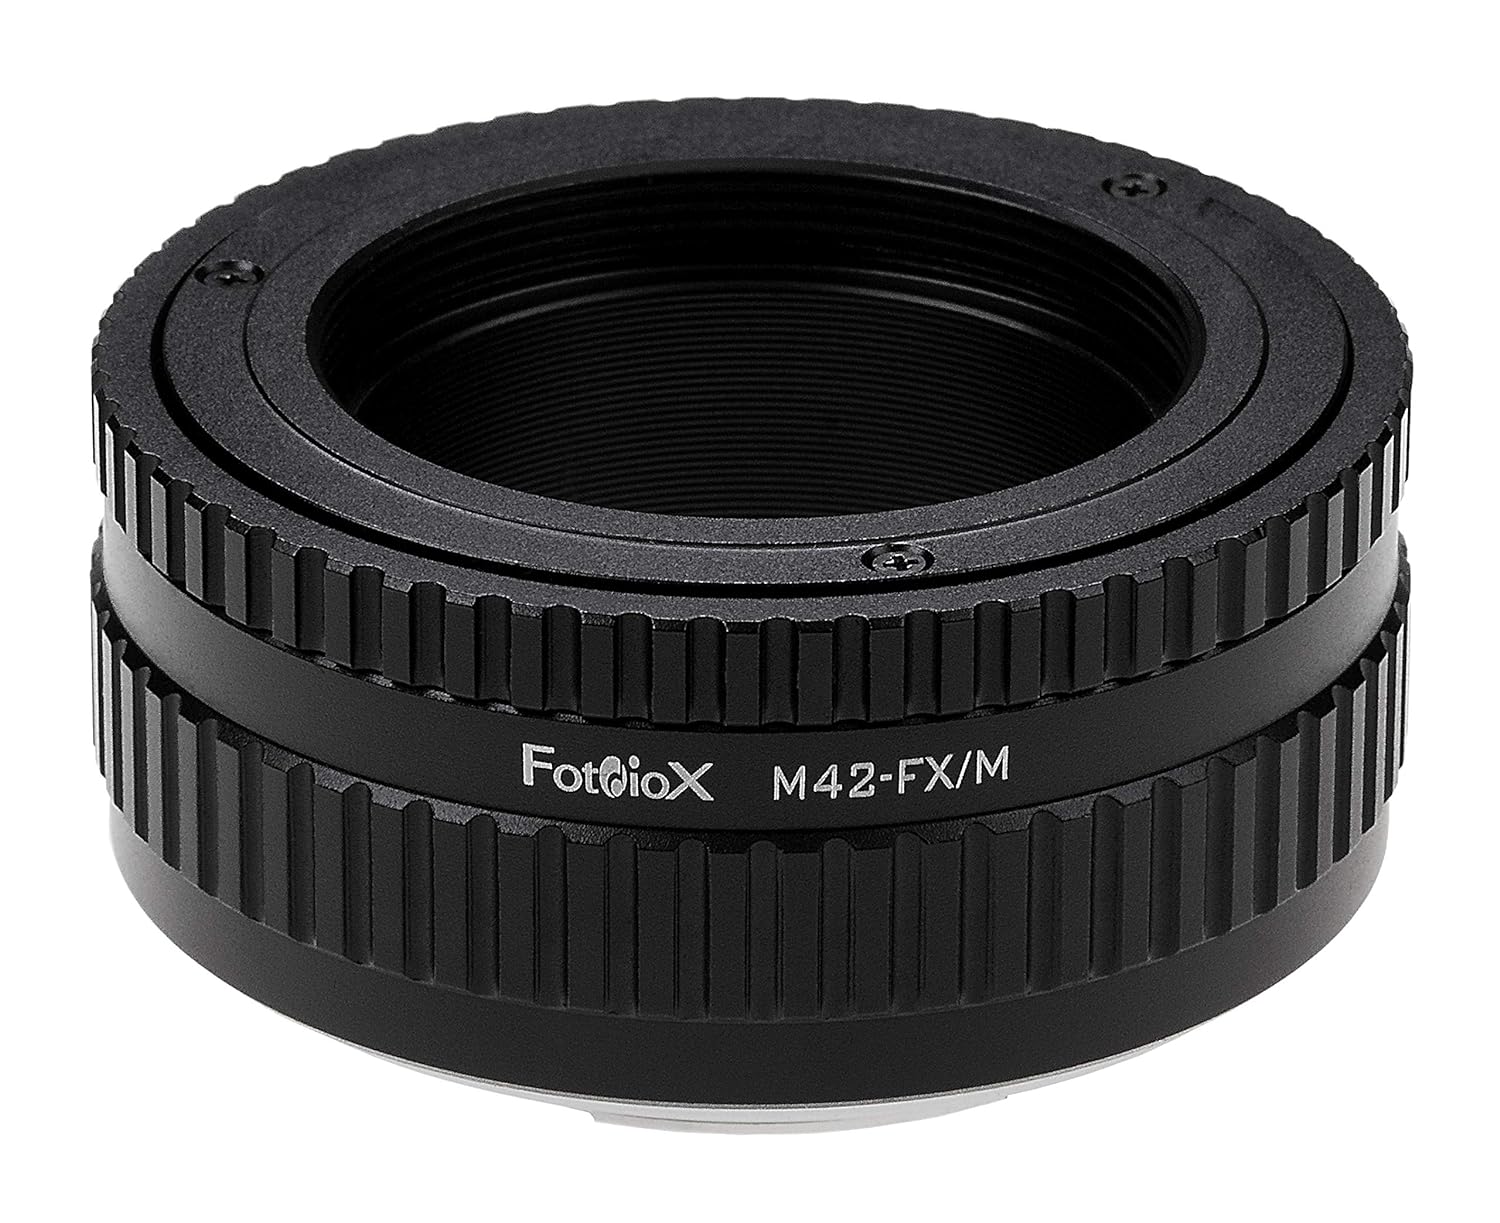 Fotodiox Lens Mount Adapter with Macro Focusing Helicoid, M42 Screw Mount Lens to Fujifilm X Camera Body (X-Mount), for Fujifilm X-Pro1, X-E1 Mirrorless Camera, Variable Magnification Helicoil